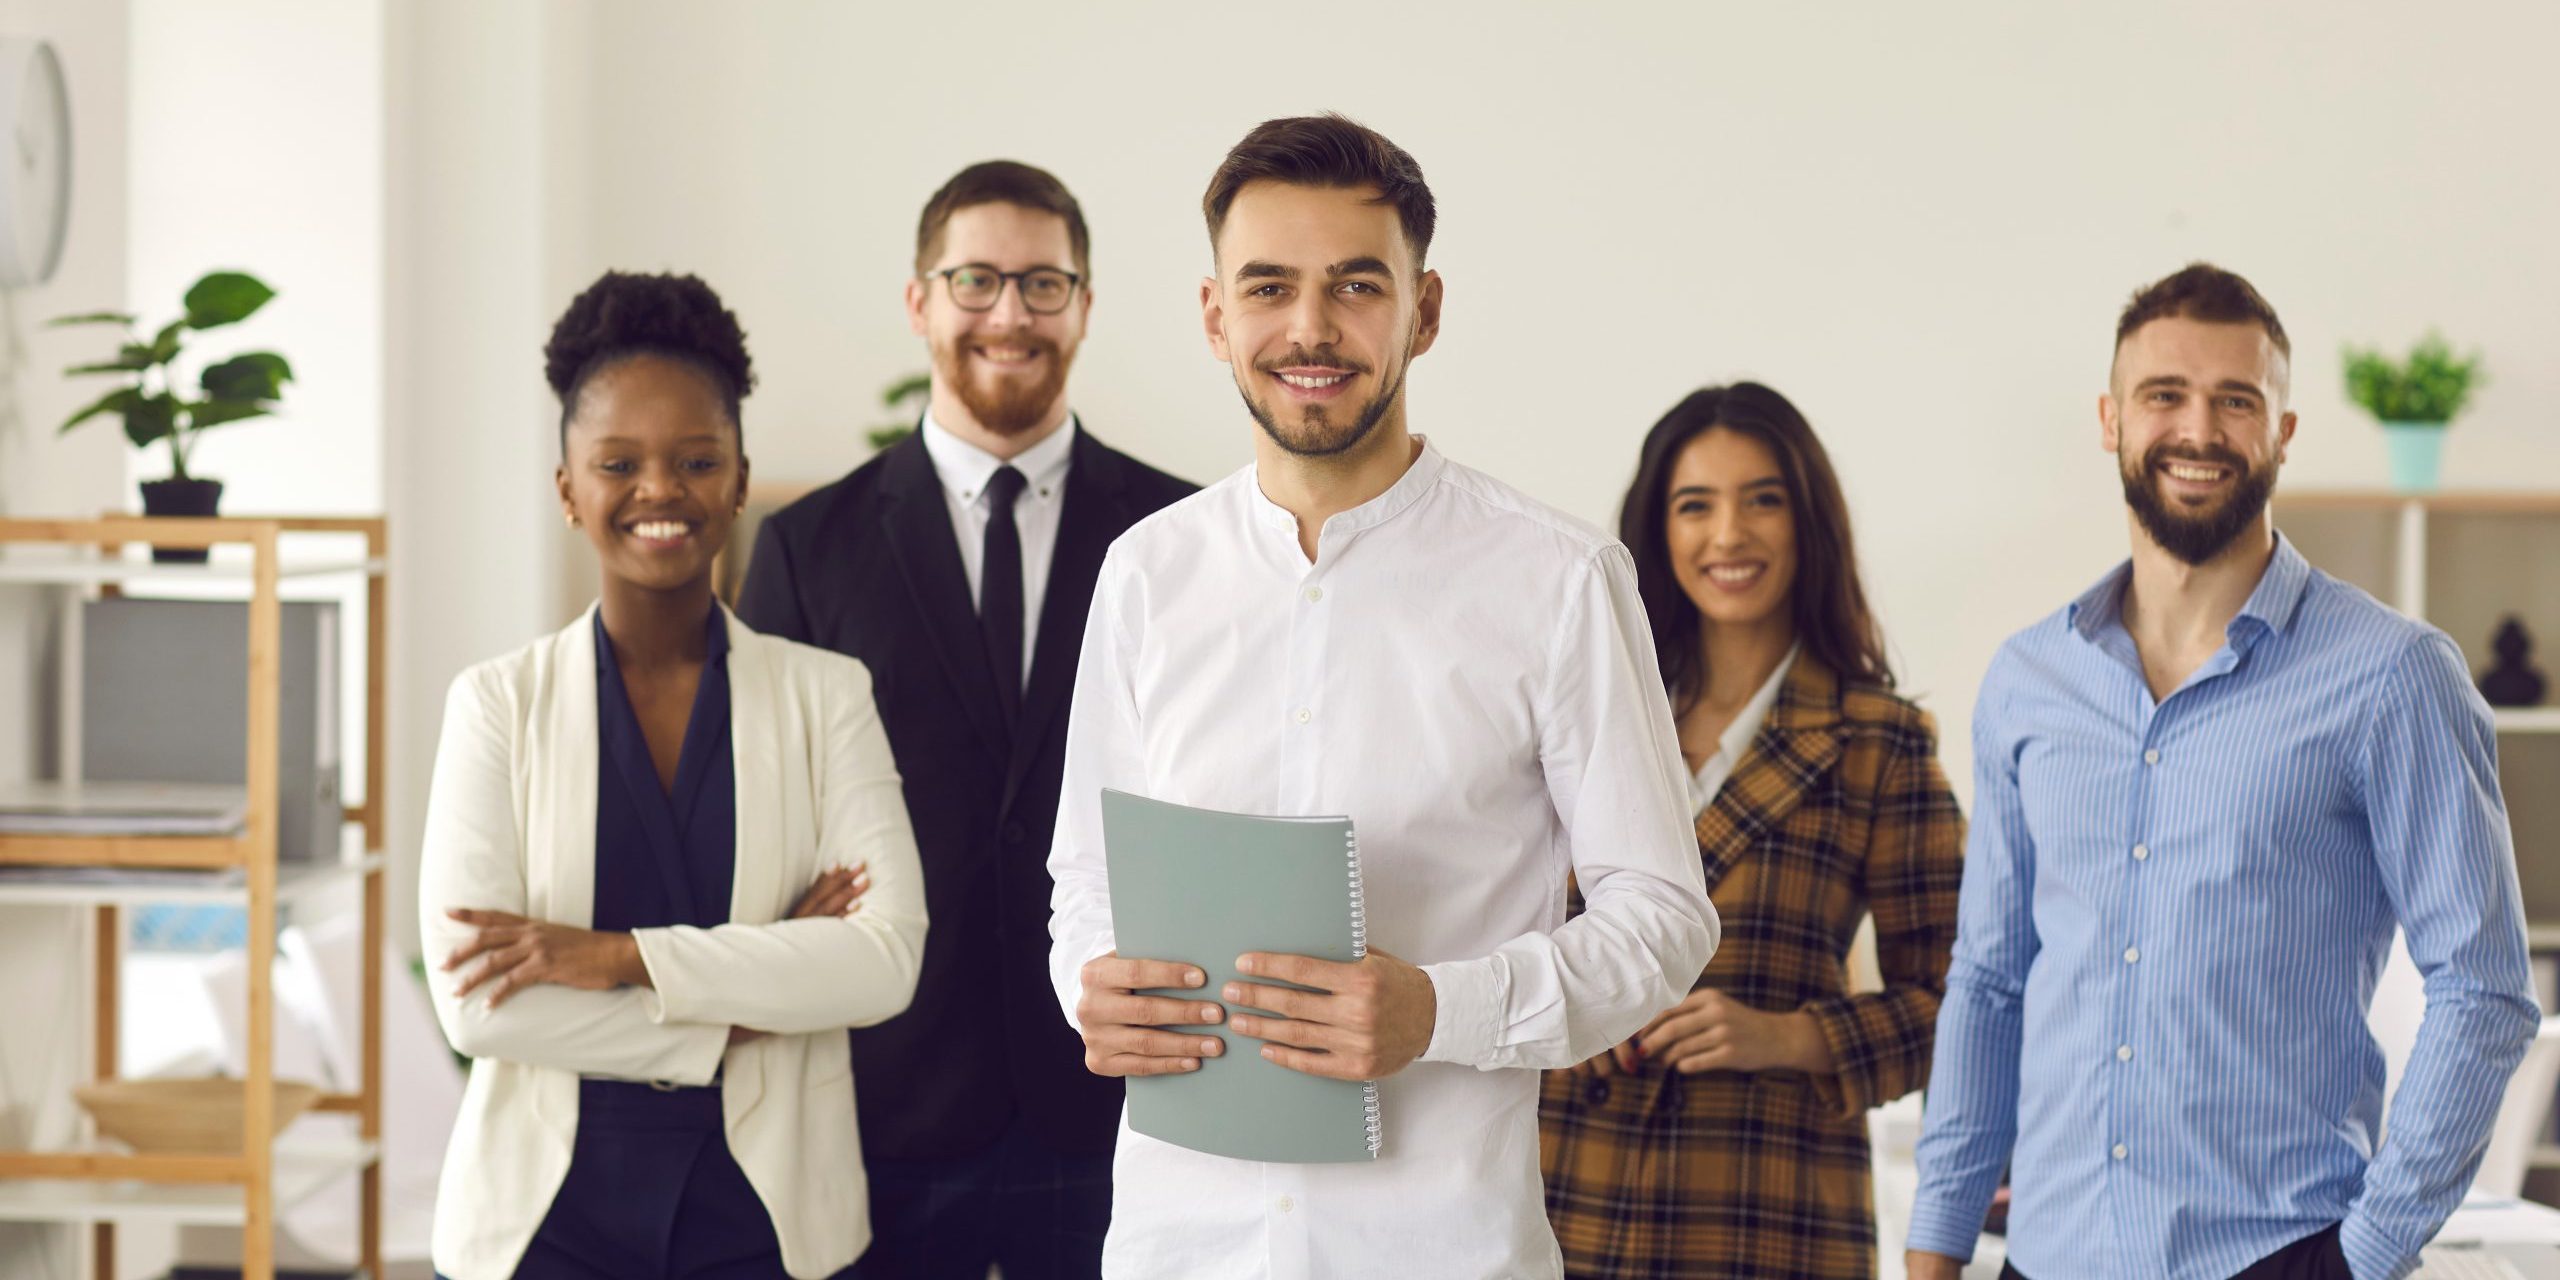 Portrait of confident successful young business male leader with diverse interracial smart people team looking at camera smiling standing in modern office. Leadership, cooperation, teamwork concept